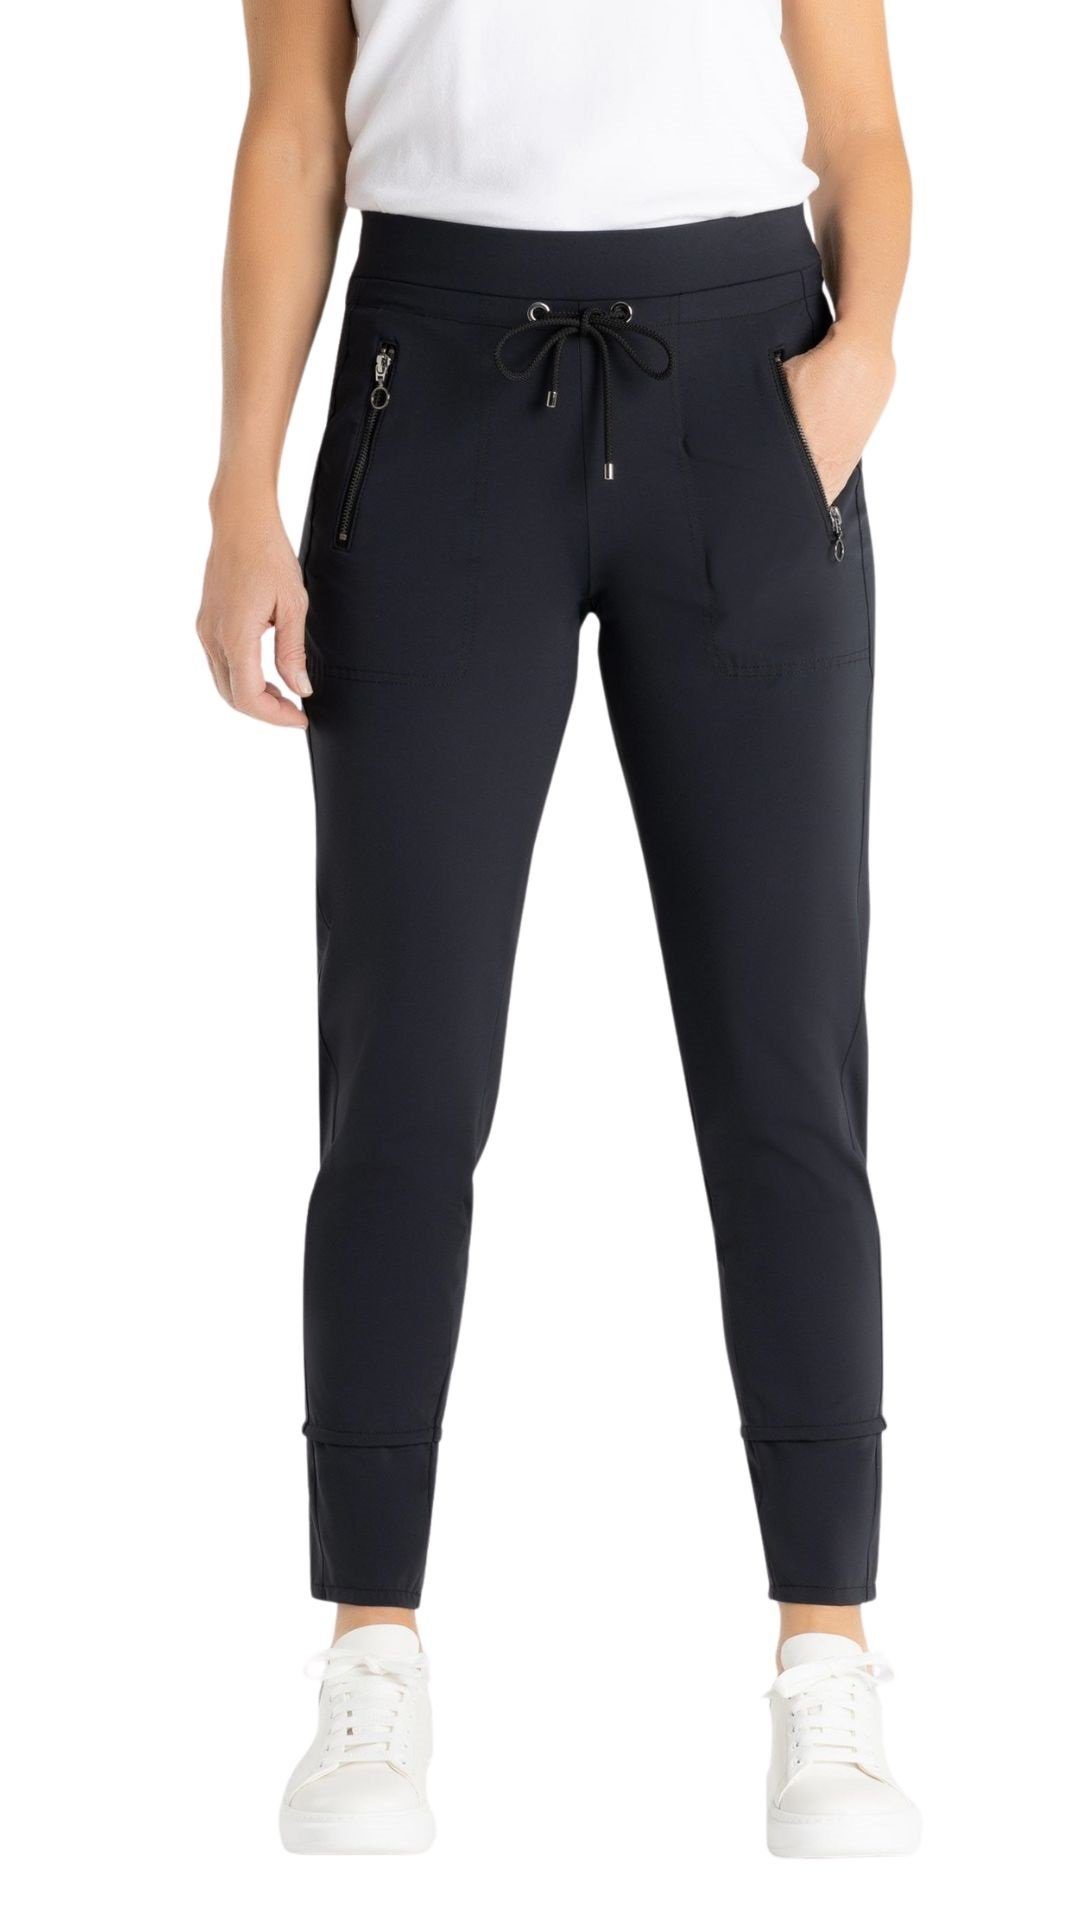 MAC Jogger Pants Easy Active Relaxed Fit mit Tunnelzug aus leichtem Techno Stretch black | Stretchjeans